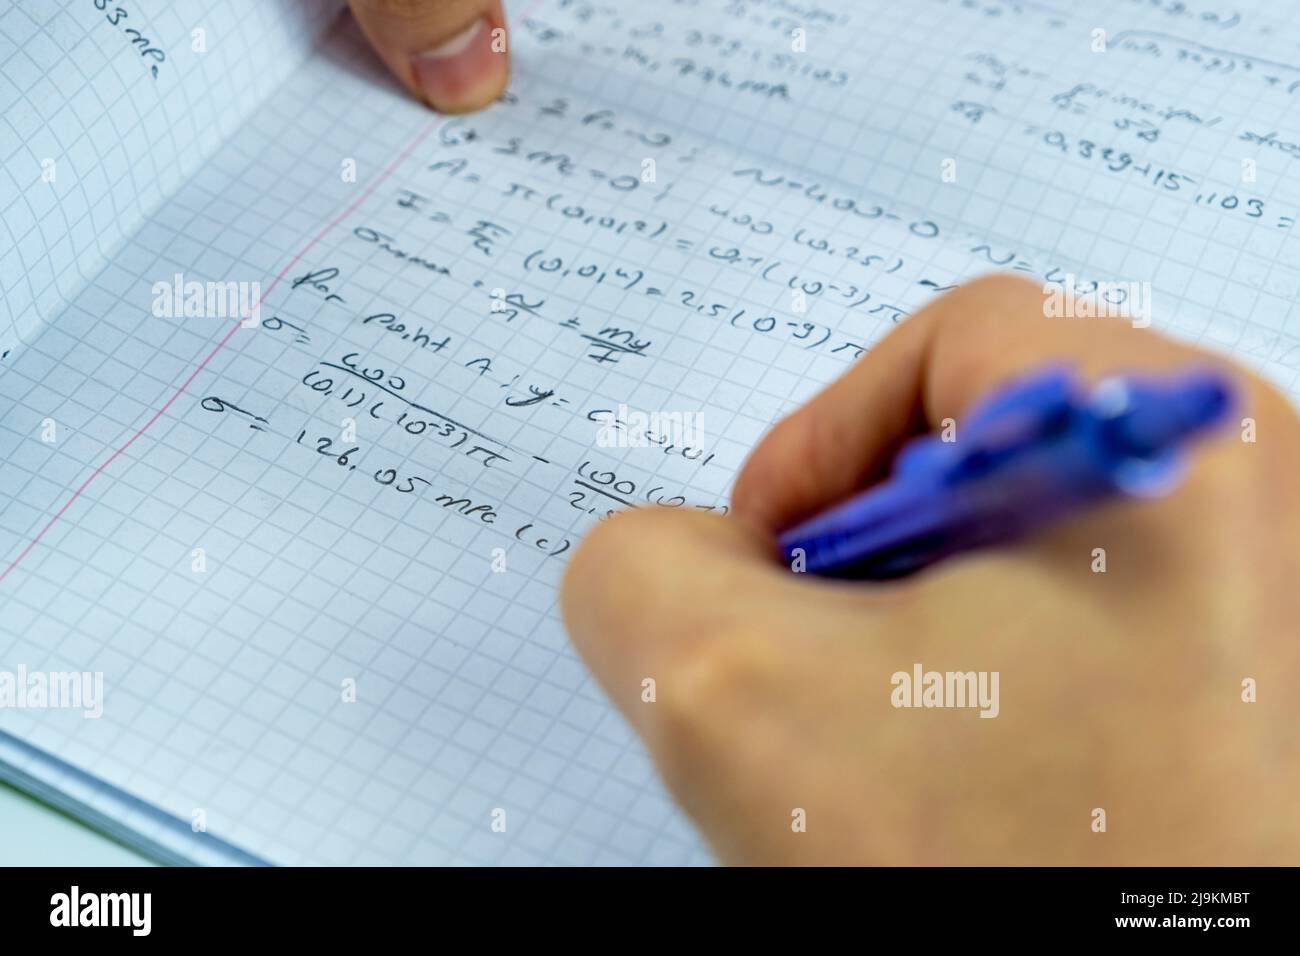 Mathematical numbers on a notebook and man hand holding purple pencil, focus on solution idea, studying math concept, sitting view Stock Photo